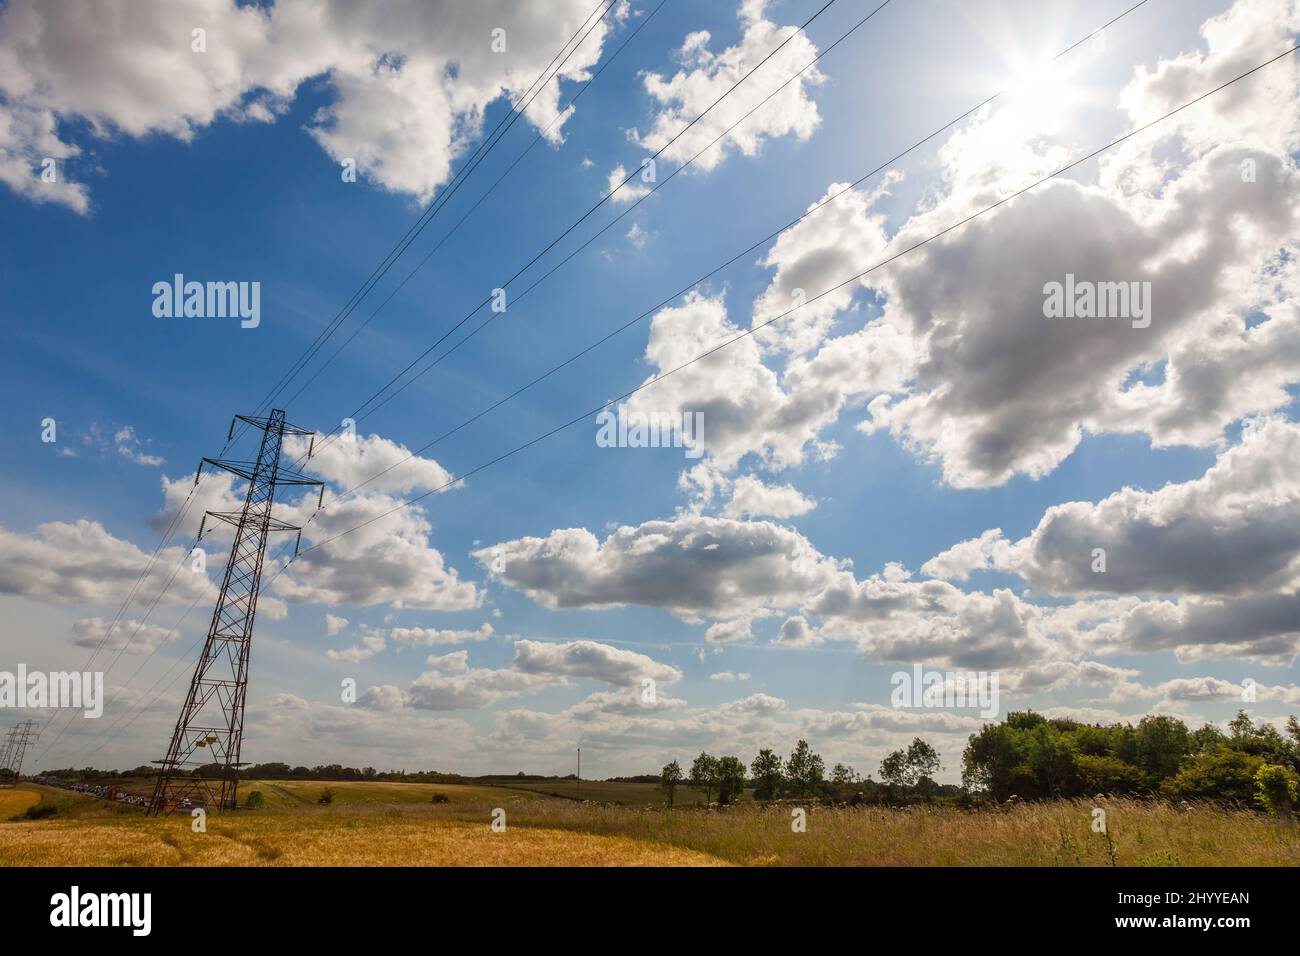 Electrical pylon power lines and traffic cars queuing on a motorway or freeway with blue sky clouds and sunshine Stock Photo